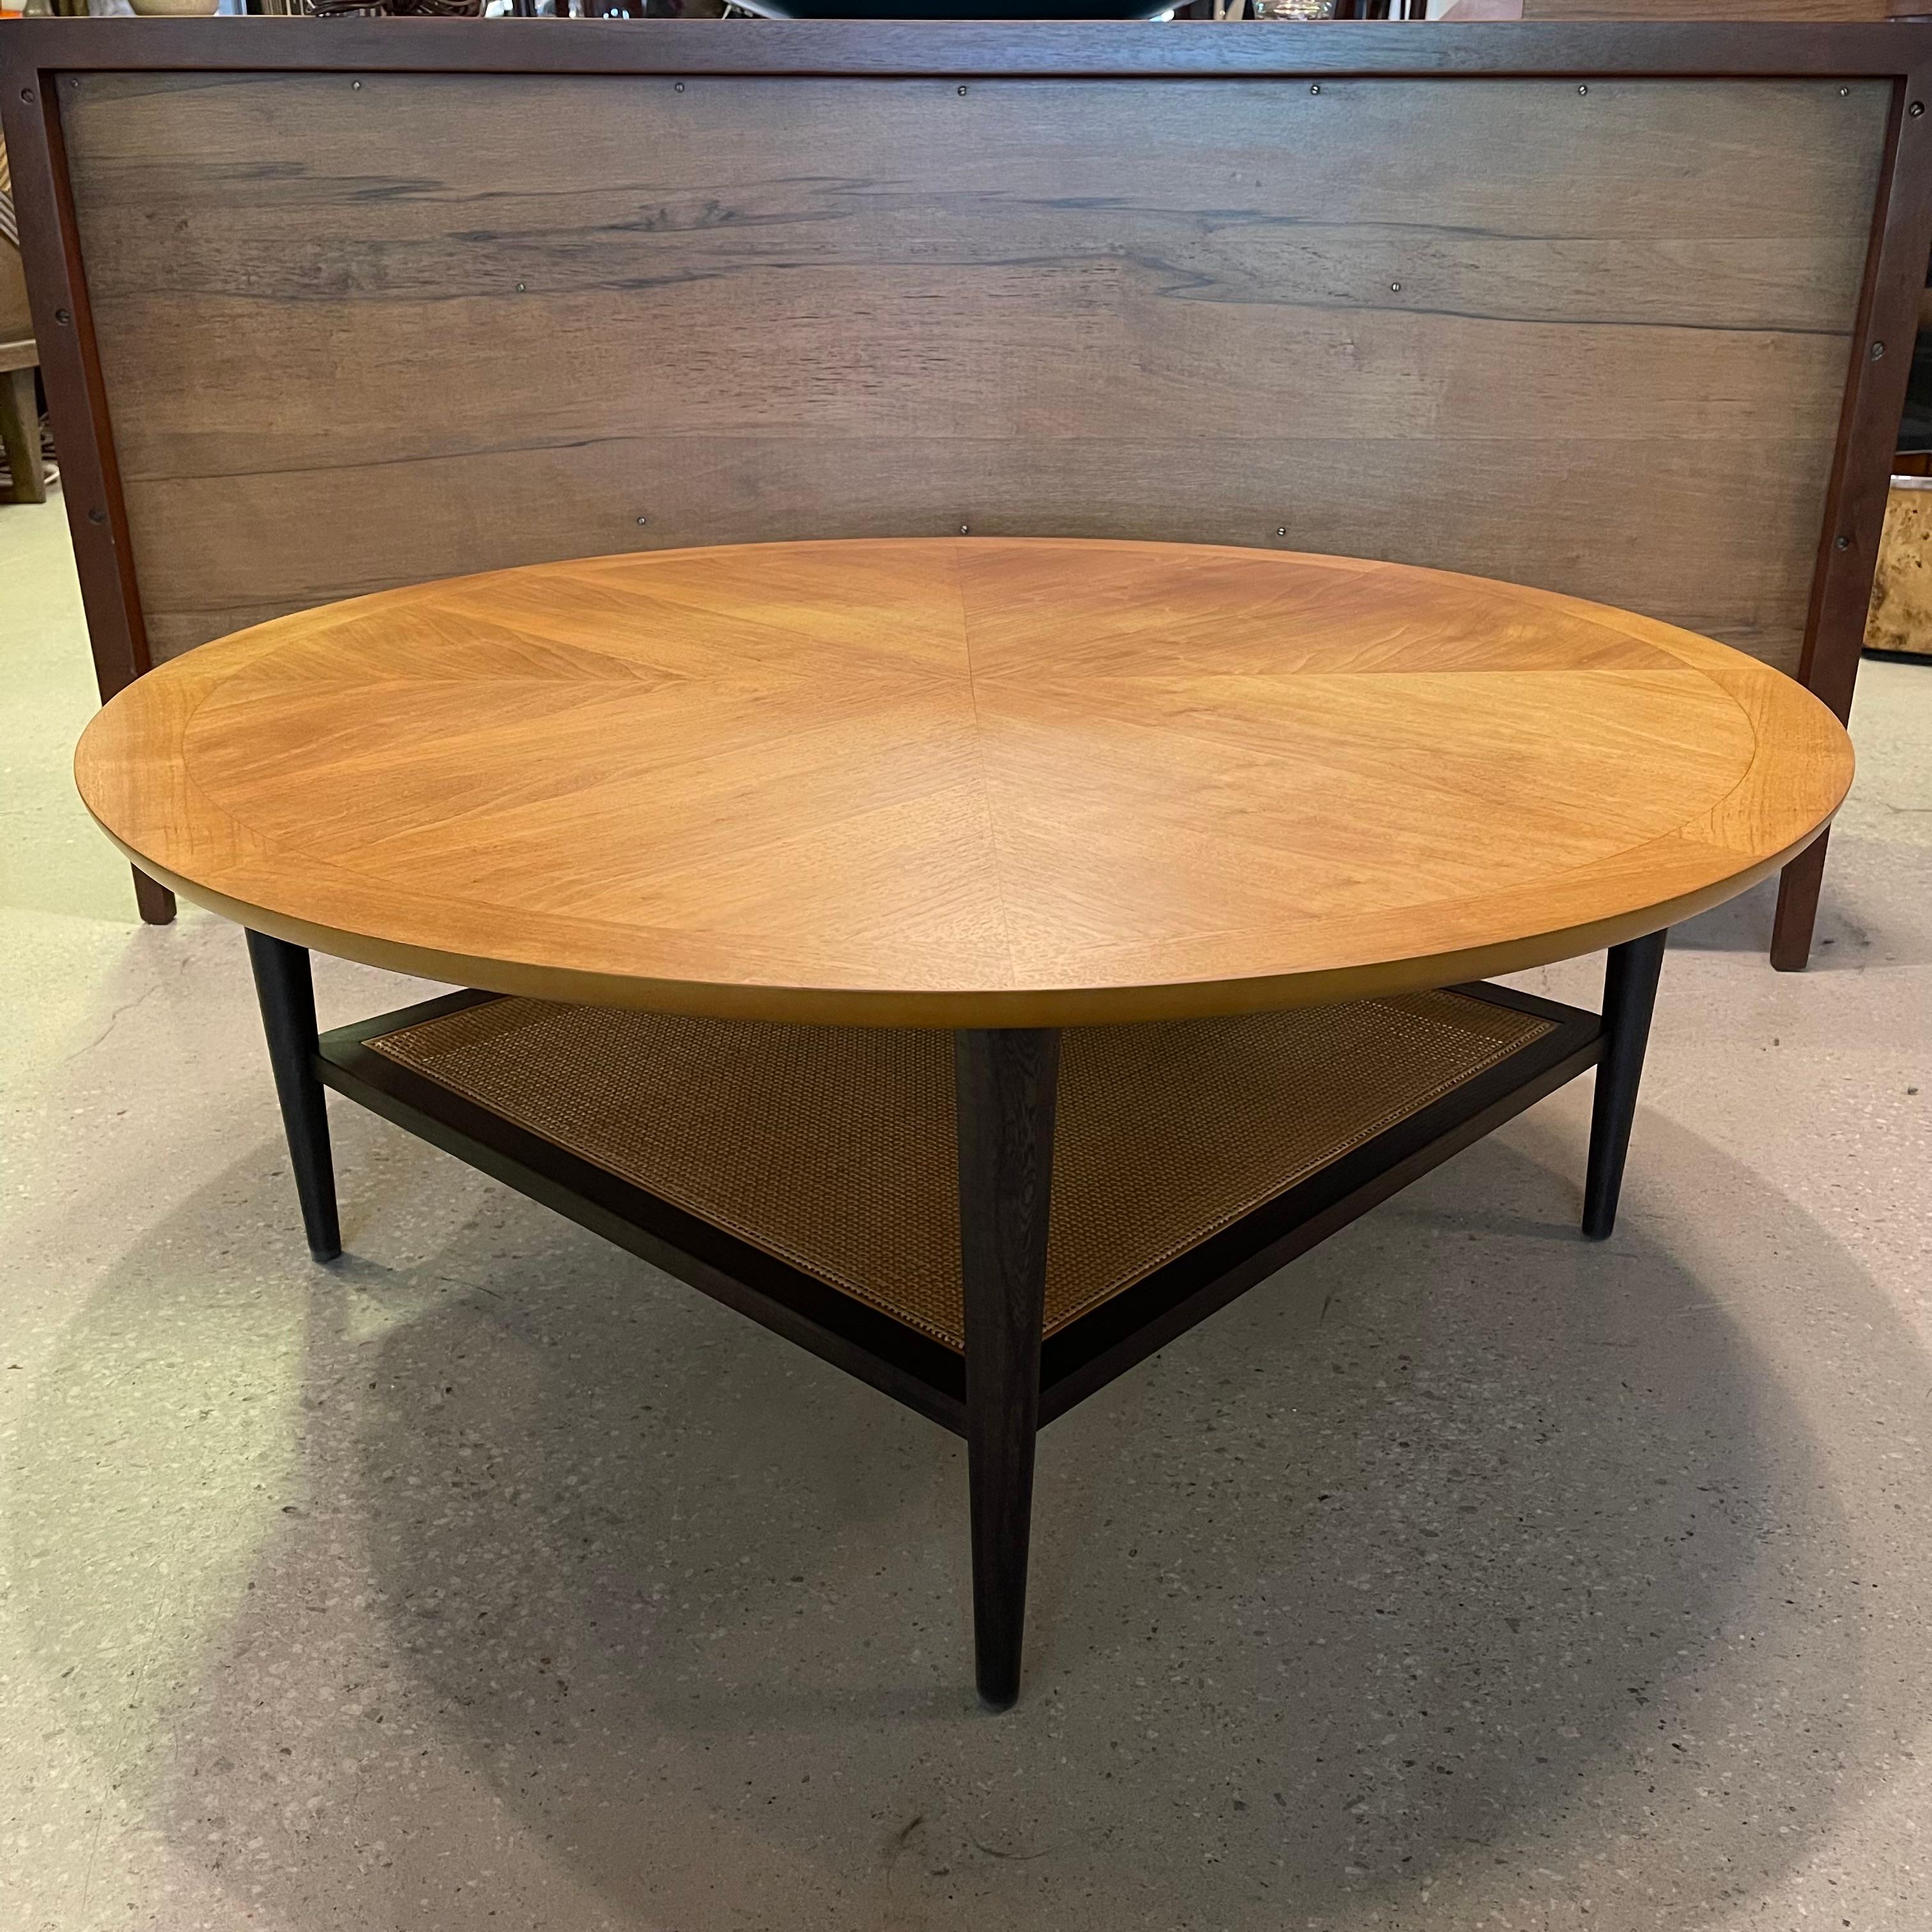 Mid-century modern, walnut coffee table by Lane Alta Vista features a custom cFsignature finish. The round, book-matched grain top with border trim is bleached contrasting with the ebonized base that highlights the natural cane lower shelf. The